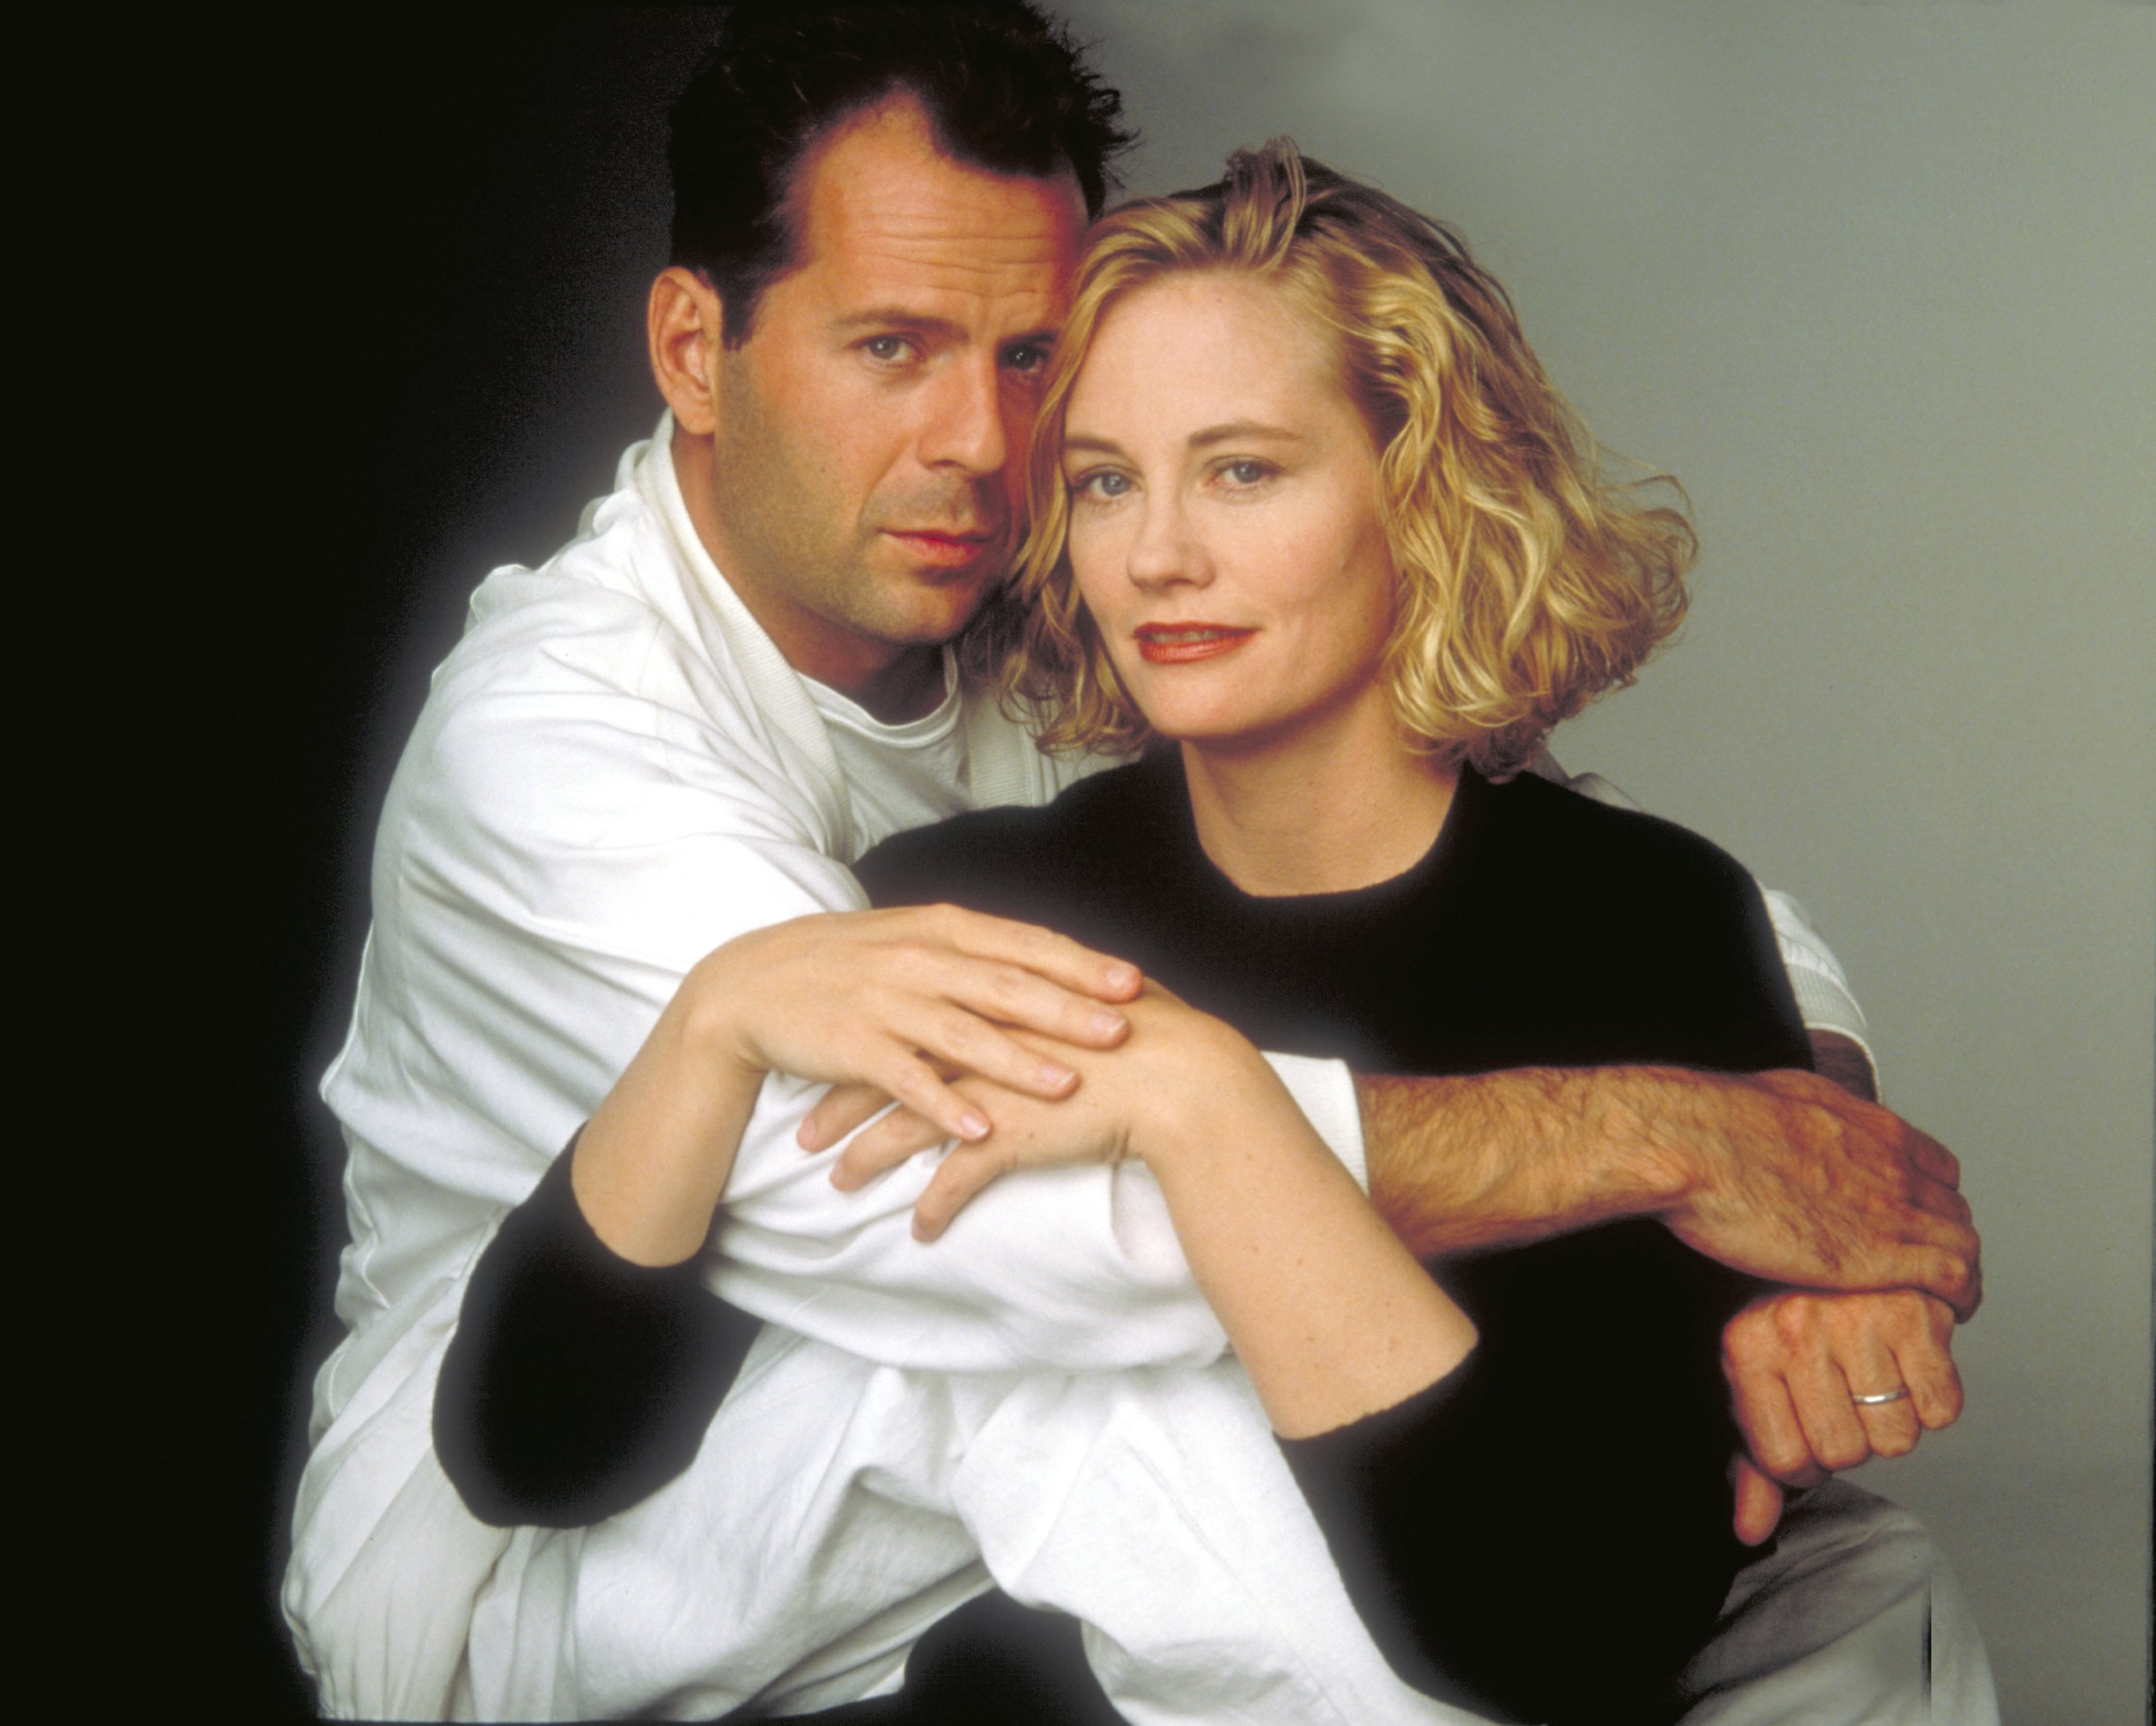 Bruce Willis And Cybill Shepherd Of Moonlighting 31 Years After The Series Last Aired